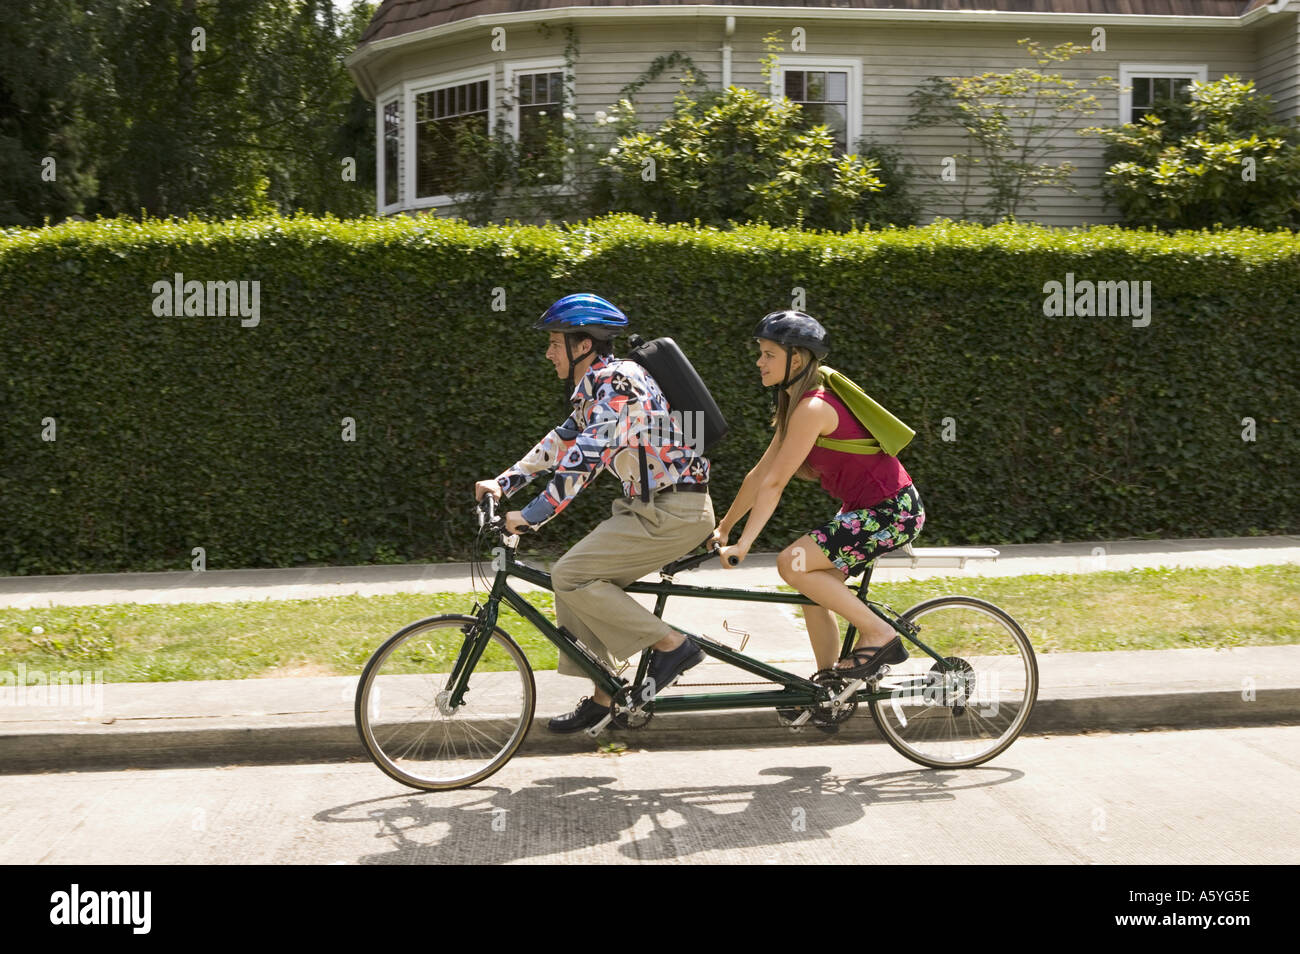 Couple riding tandem bicycle Stock Photo